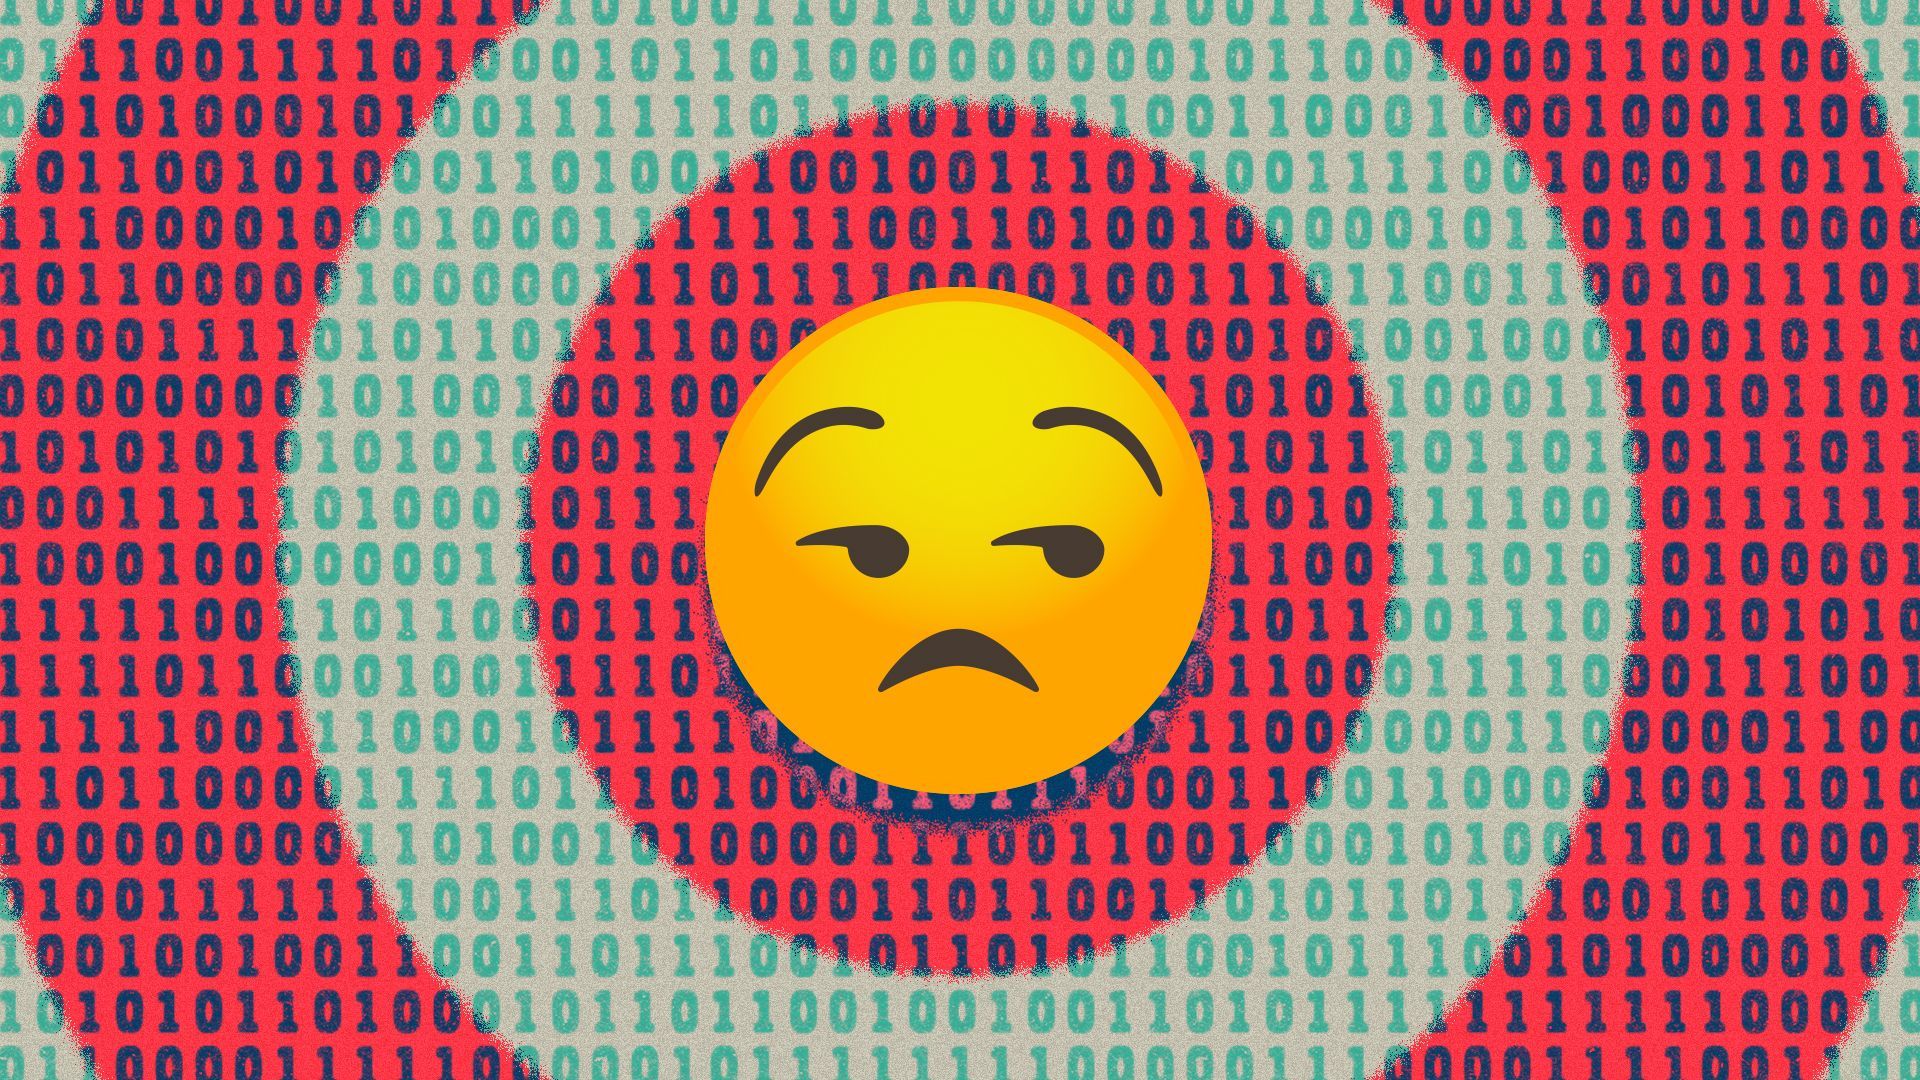 Illustration of an unimpressed emoji at the center of a bullseye made of binary code.